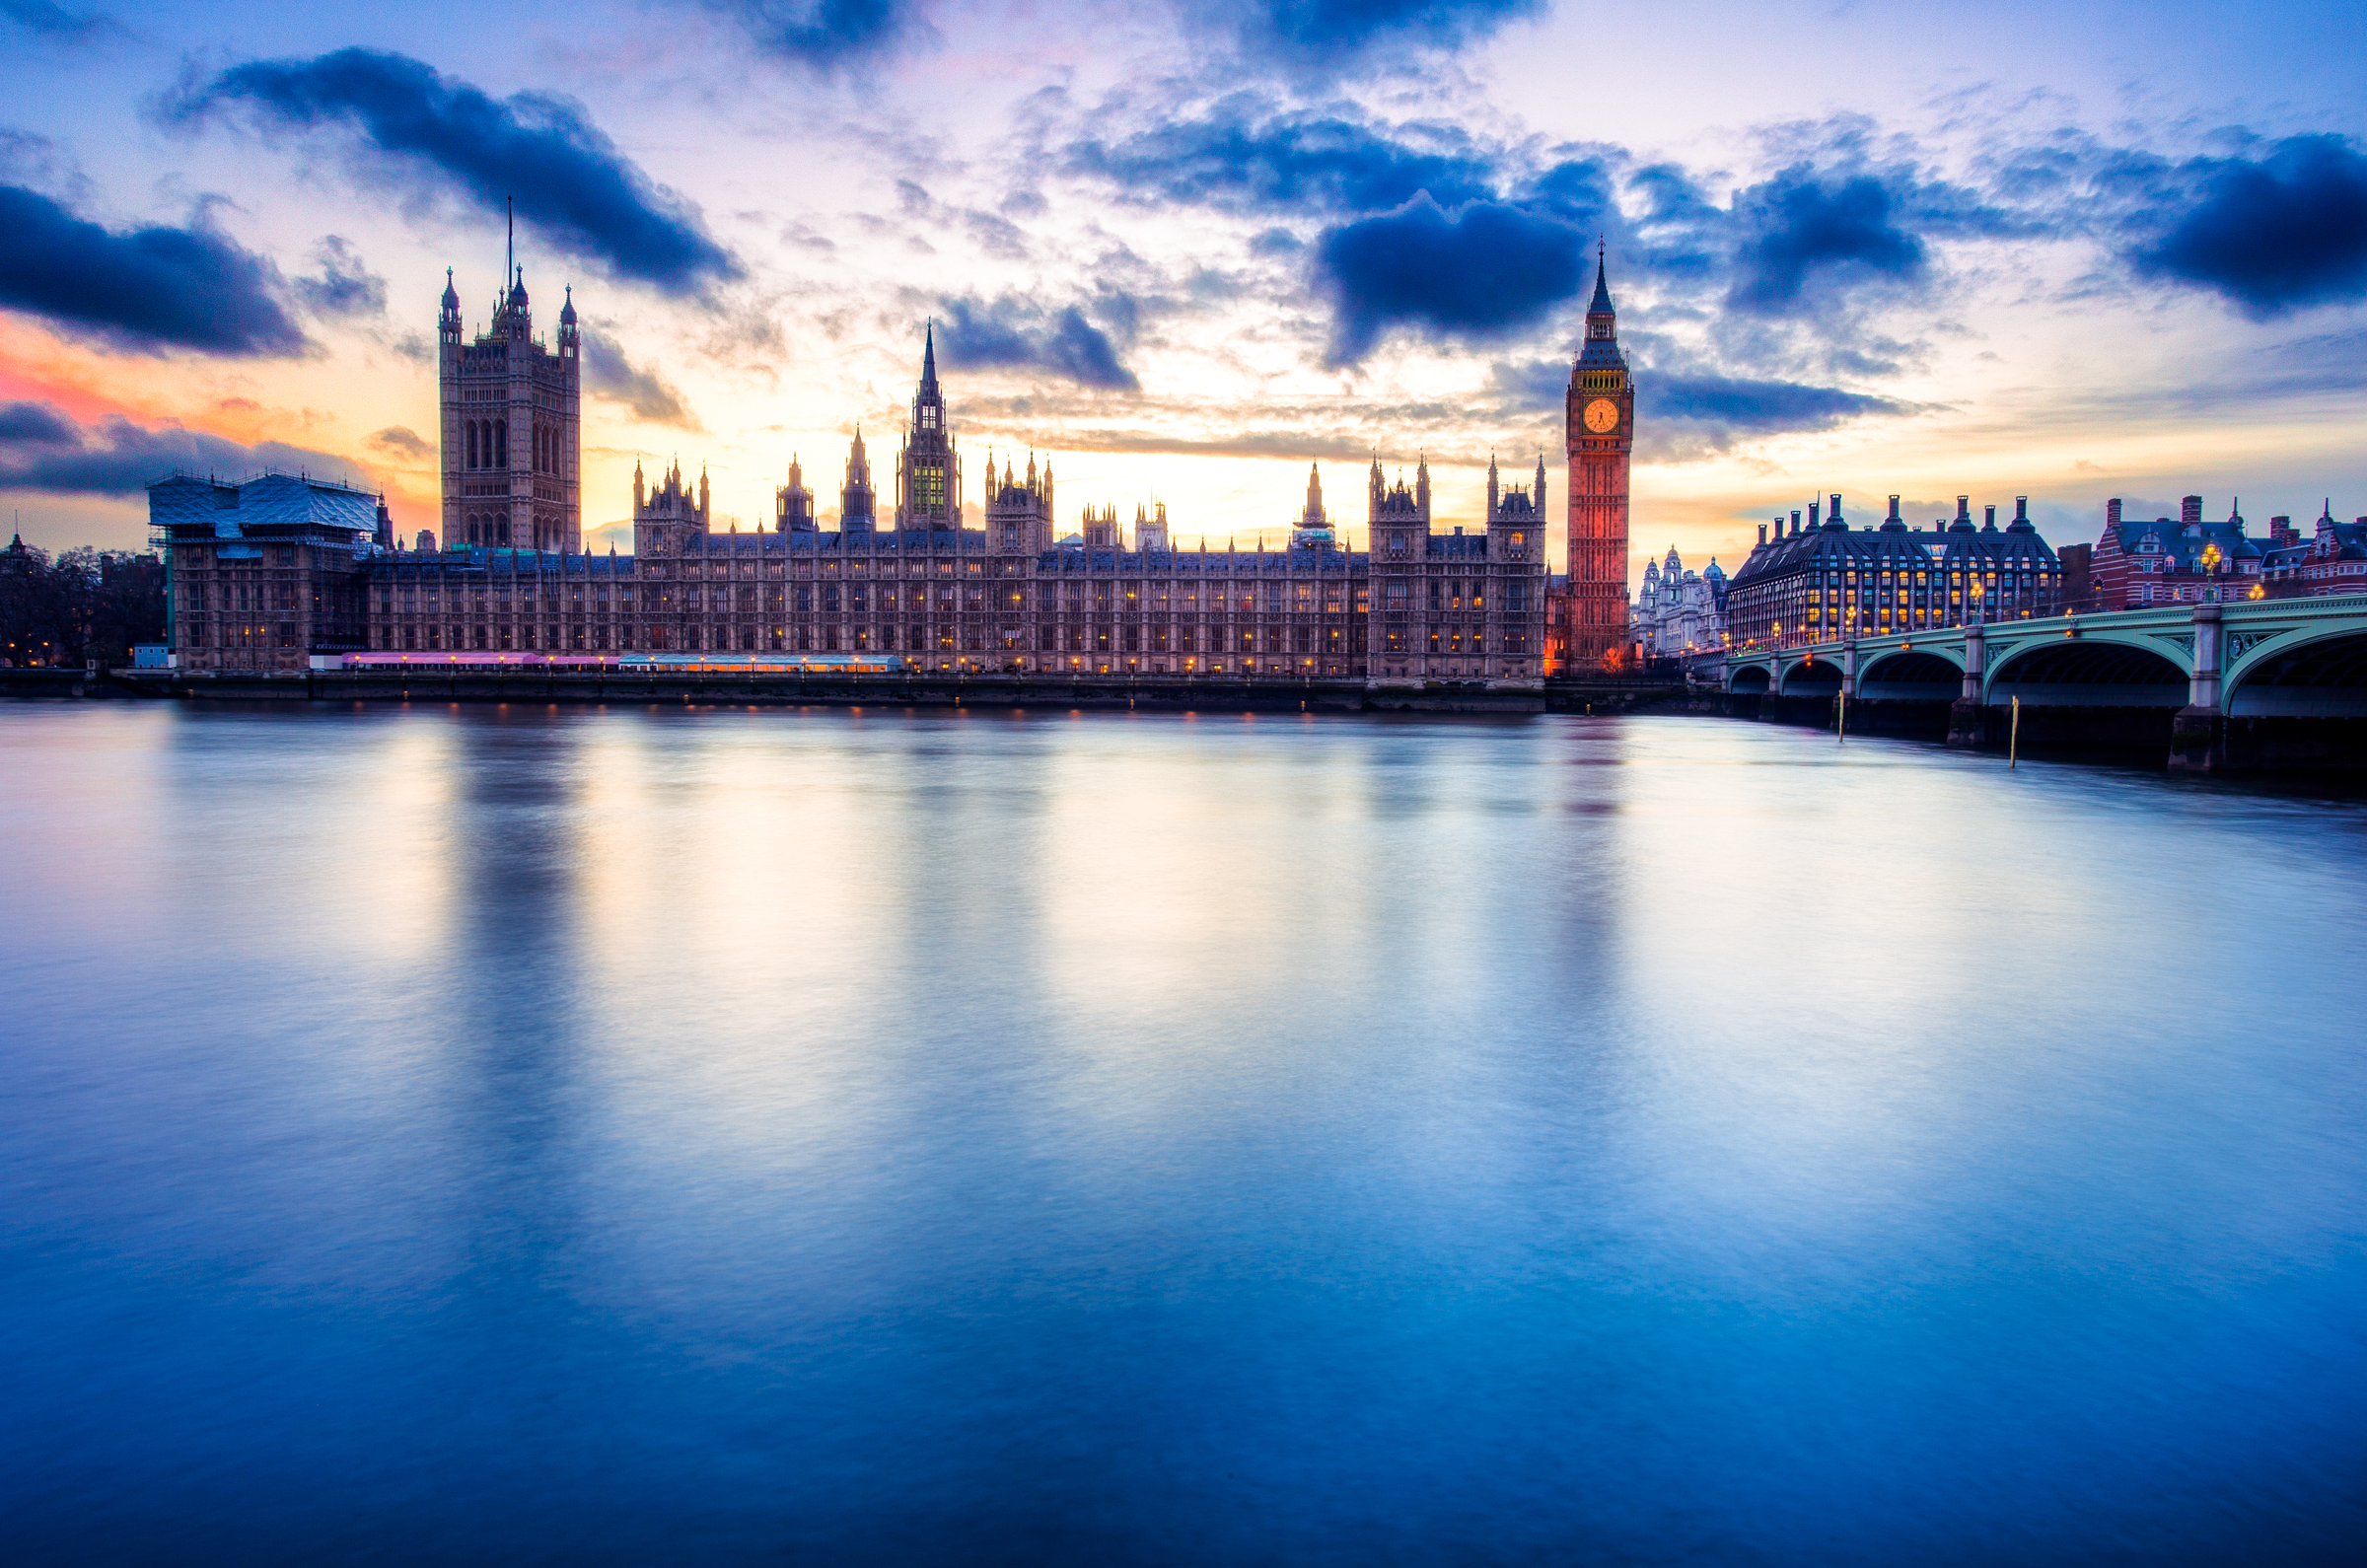 man made, palace of westminster, big ben, building, london, monument, river, thames, united kingdom, palaces